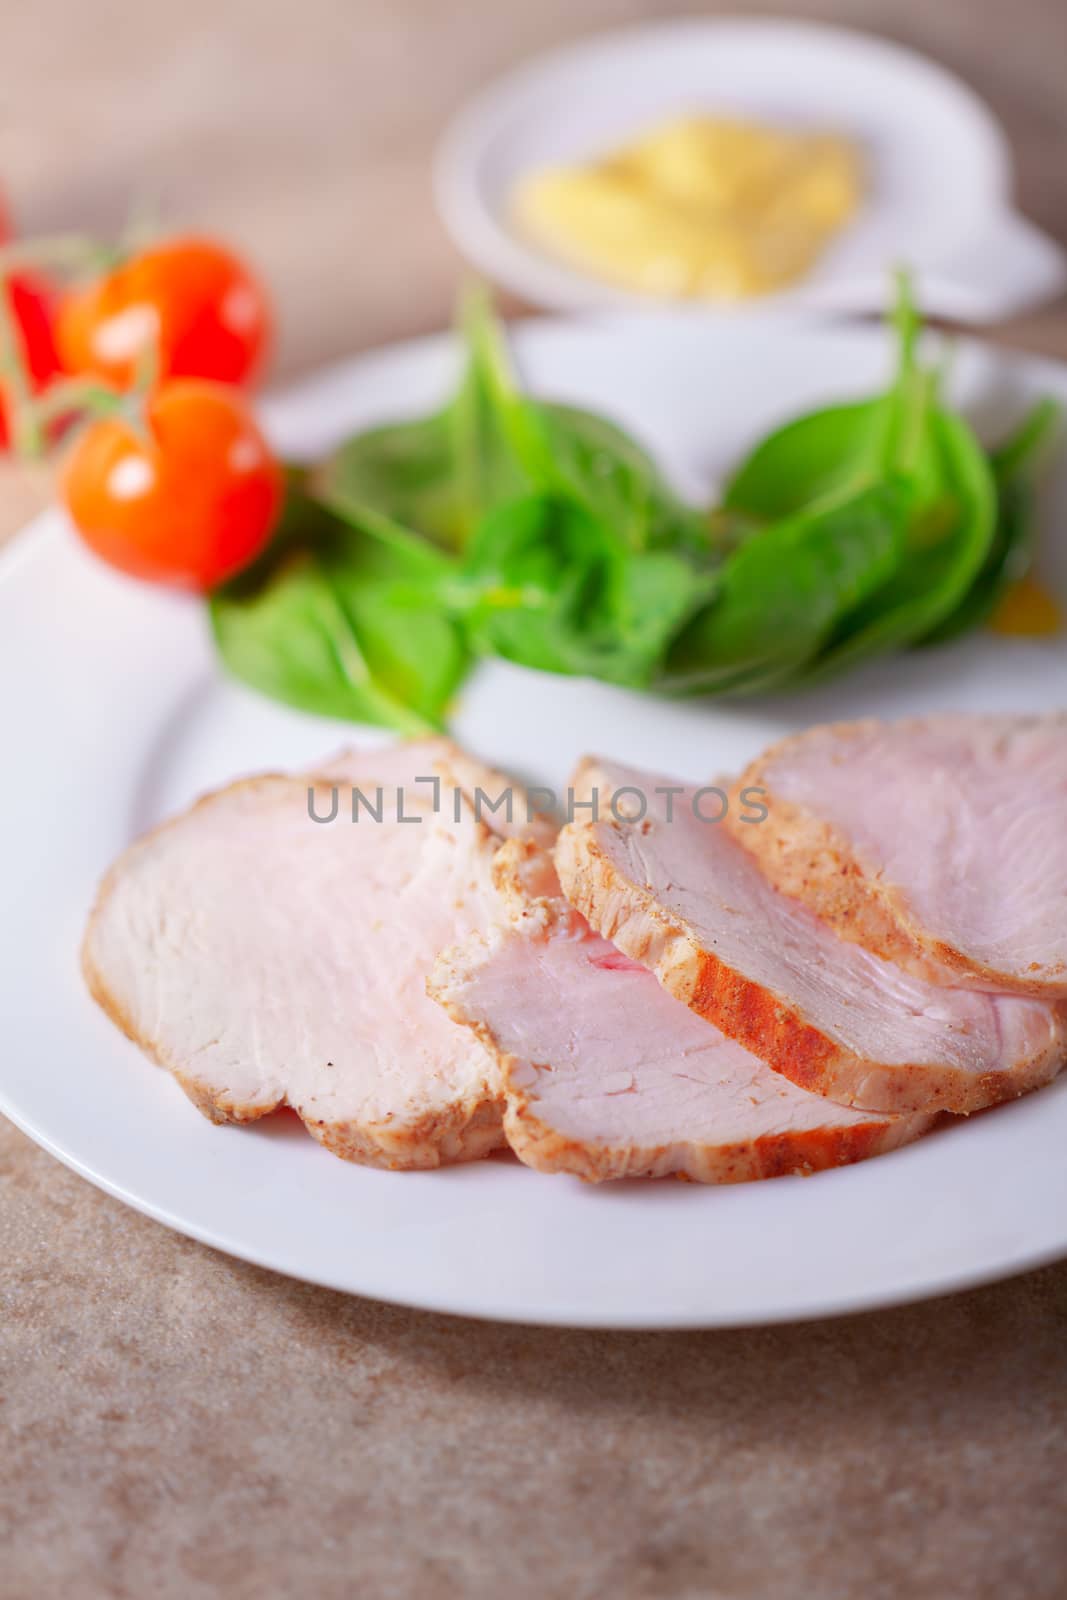 Turkey breast with green salad by supercat67